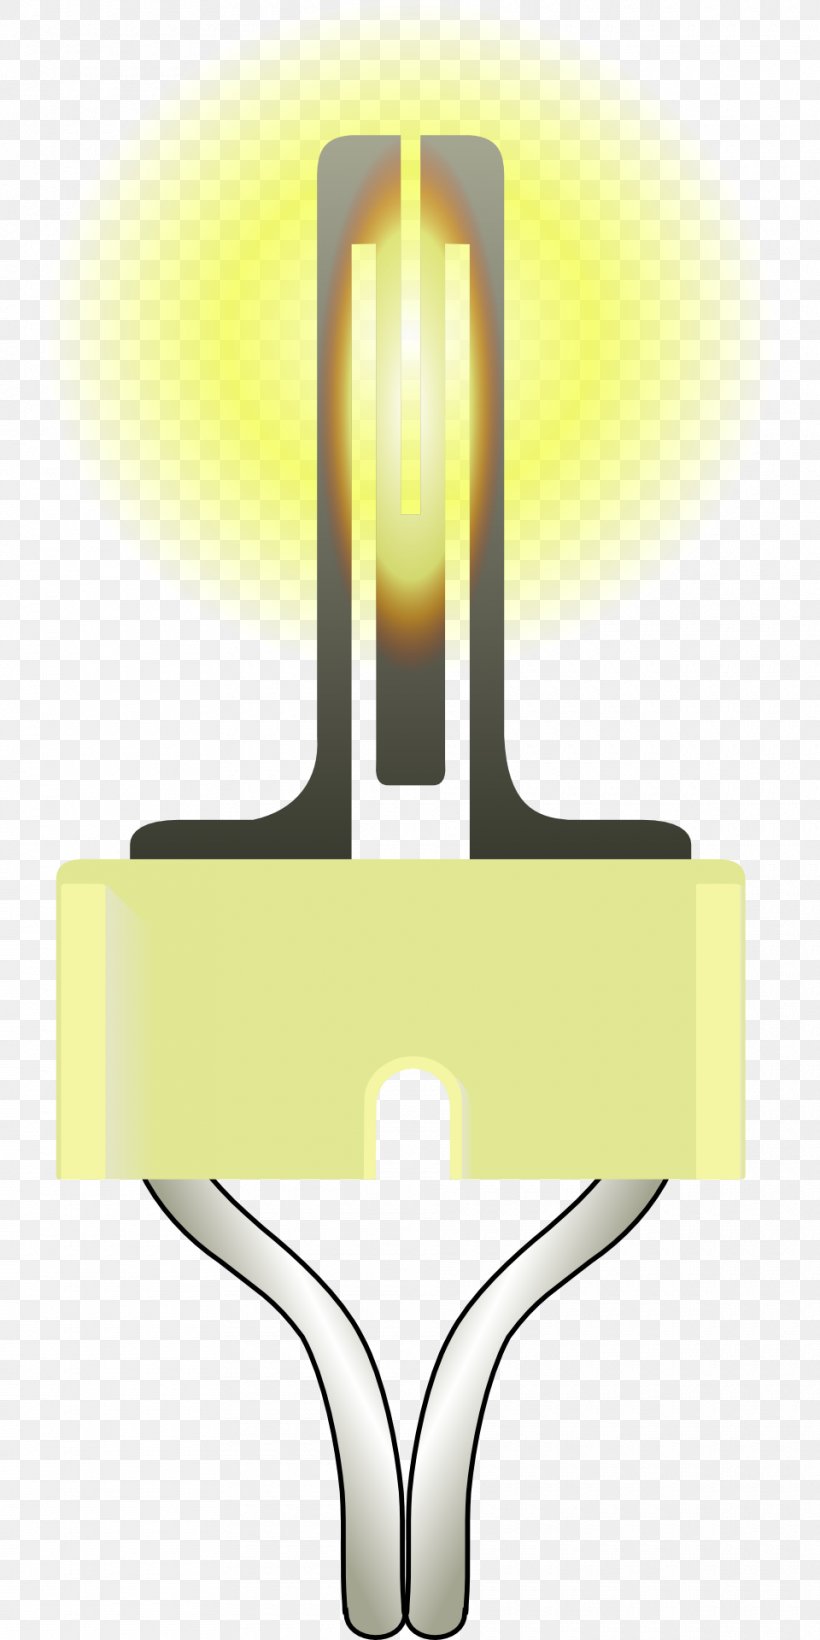 Electrical Filament Clip Art, PNG, 960x1920px, Electrical Filament, Cross, Electricity, Incandescence, Public Domain Download Free